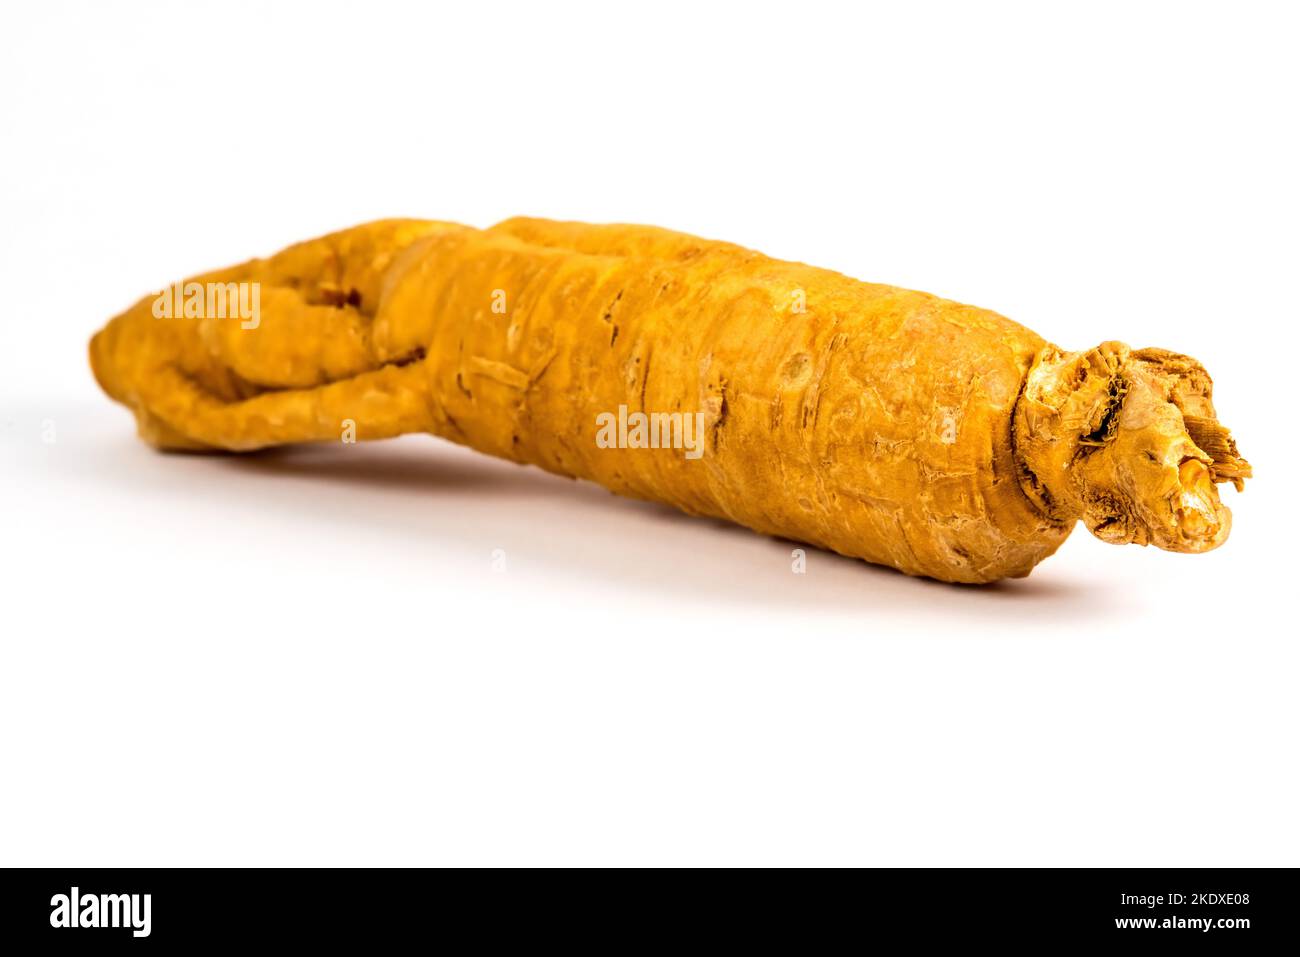 ginseng root on a white background Stock Photo